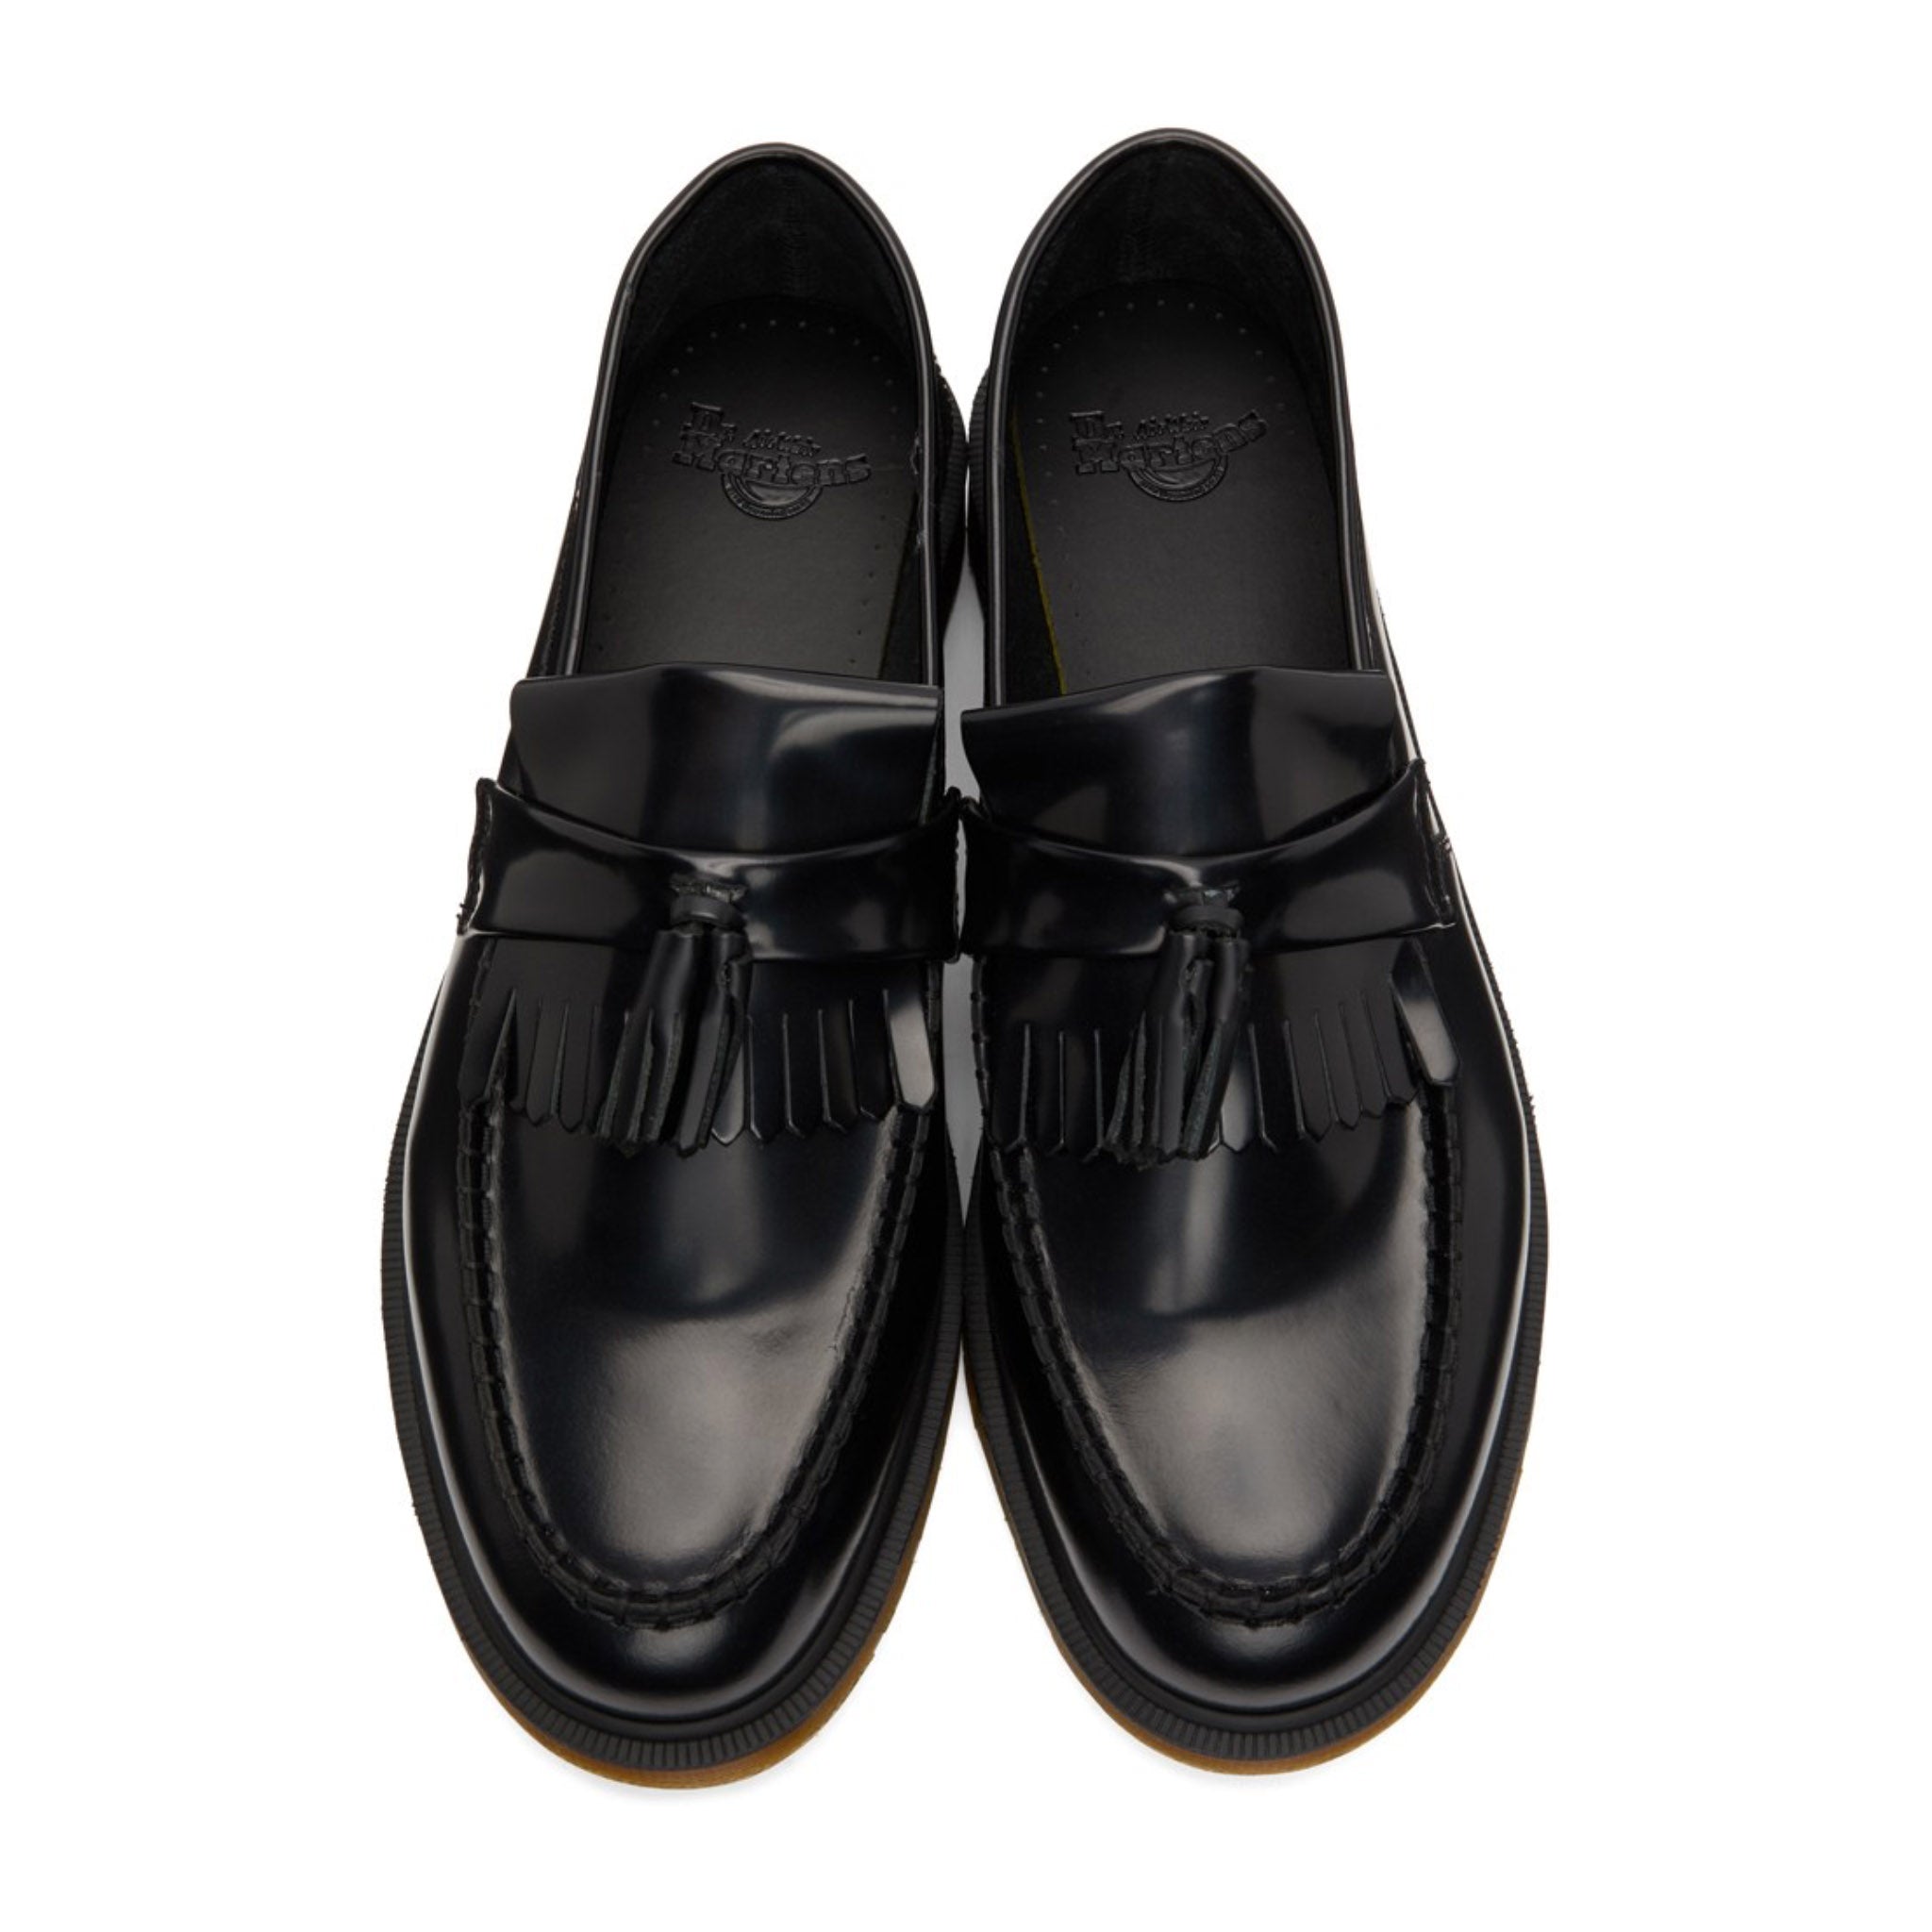 Dr. Martens Adrian Smooth Leather Tassel Loafers (Black Polished Smooth)